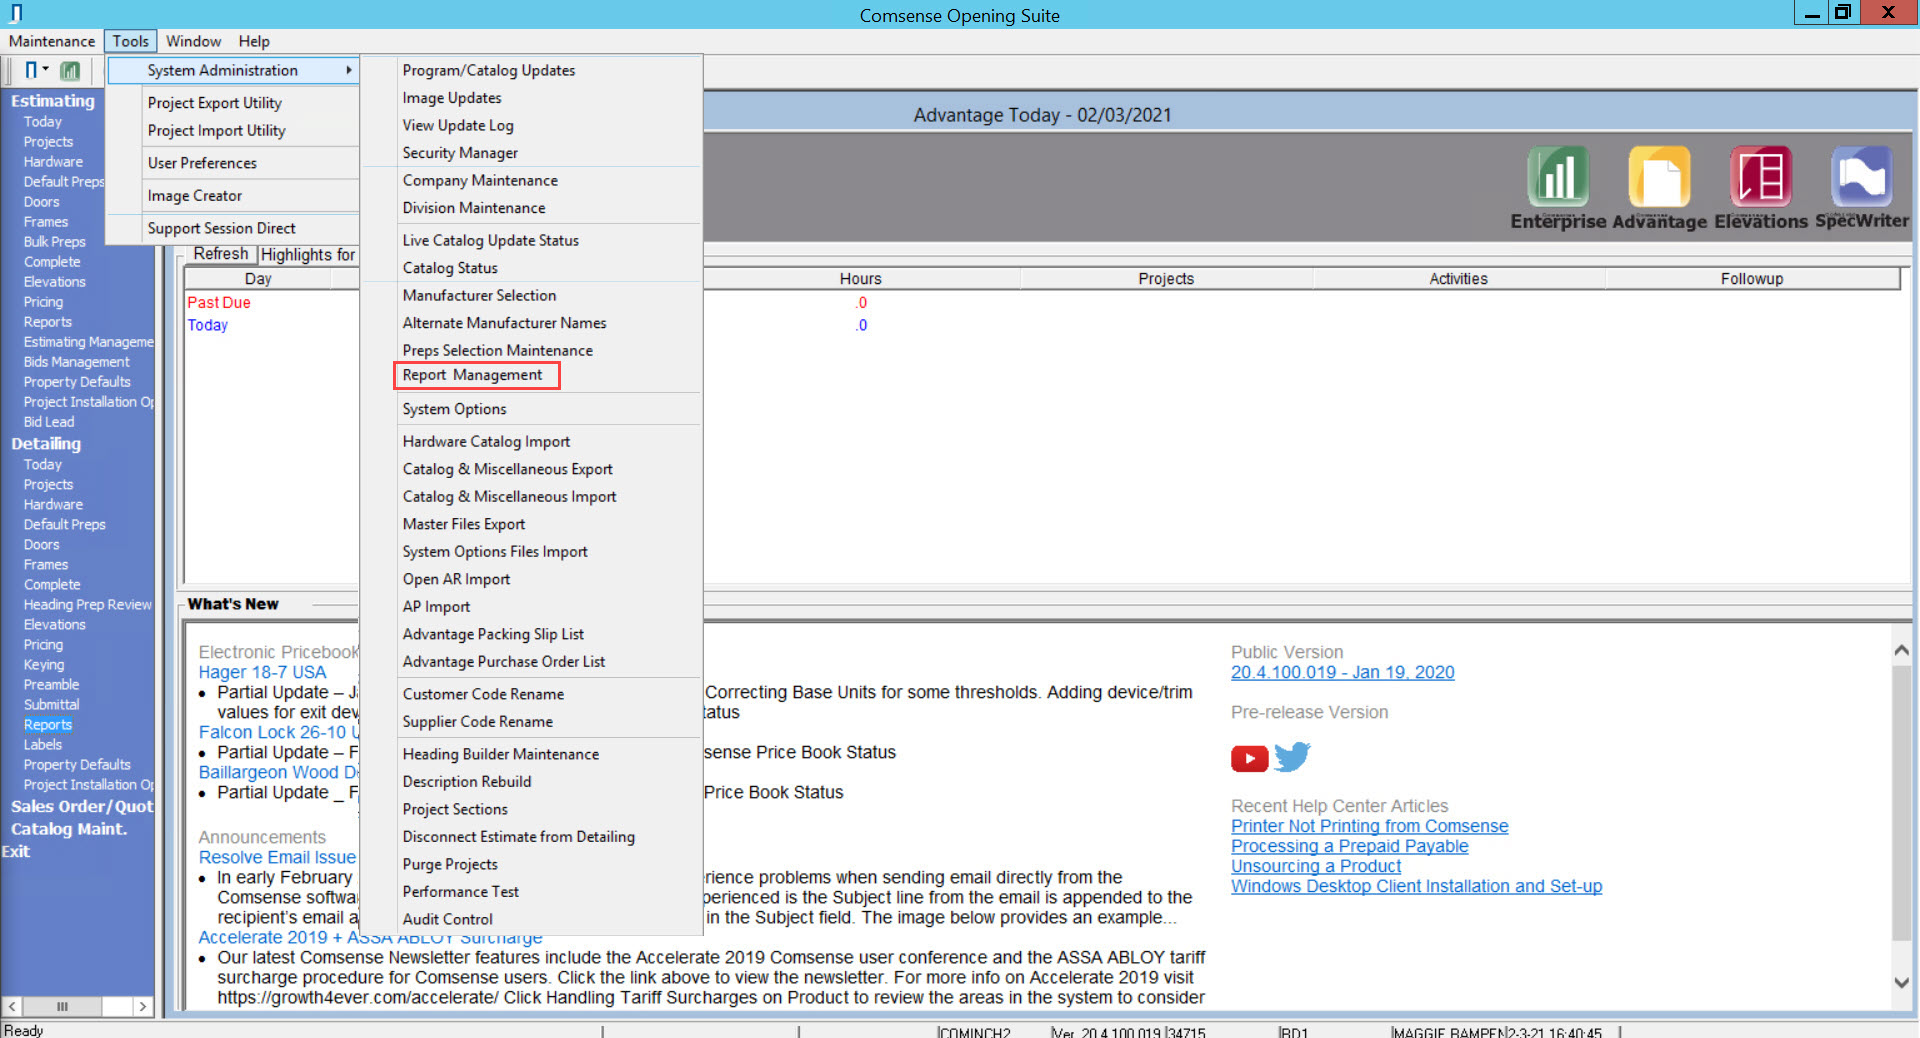 Advantage window; shows the pathway to the Report Management from the Advantage top toolbar.